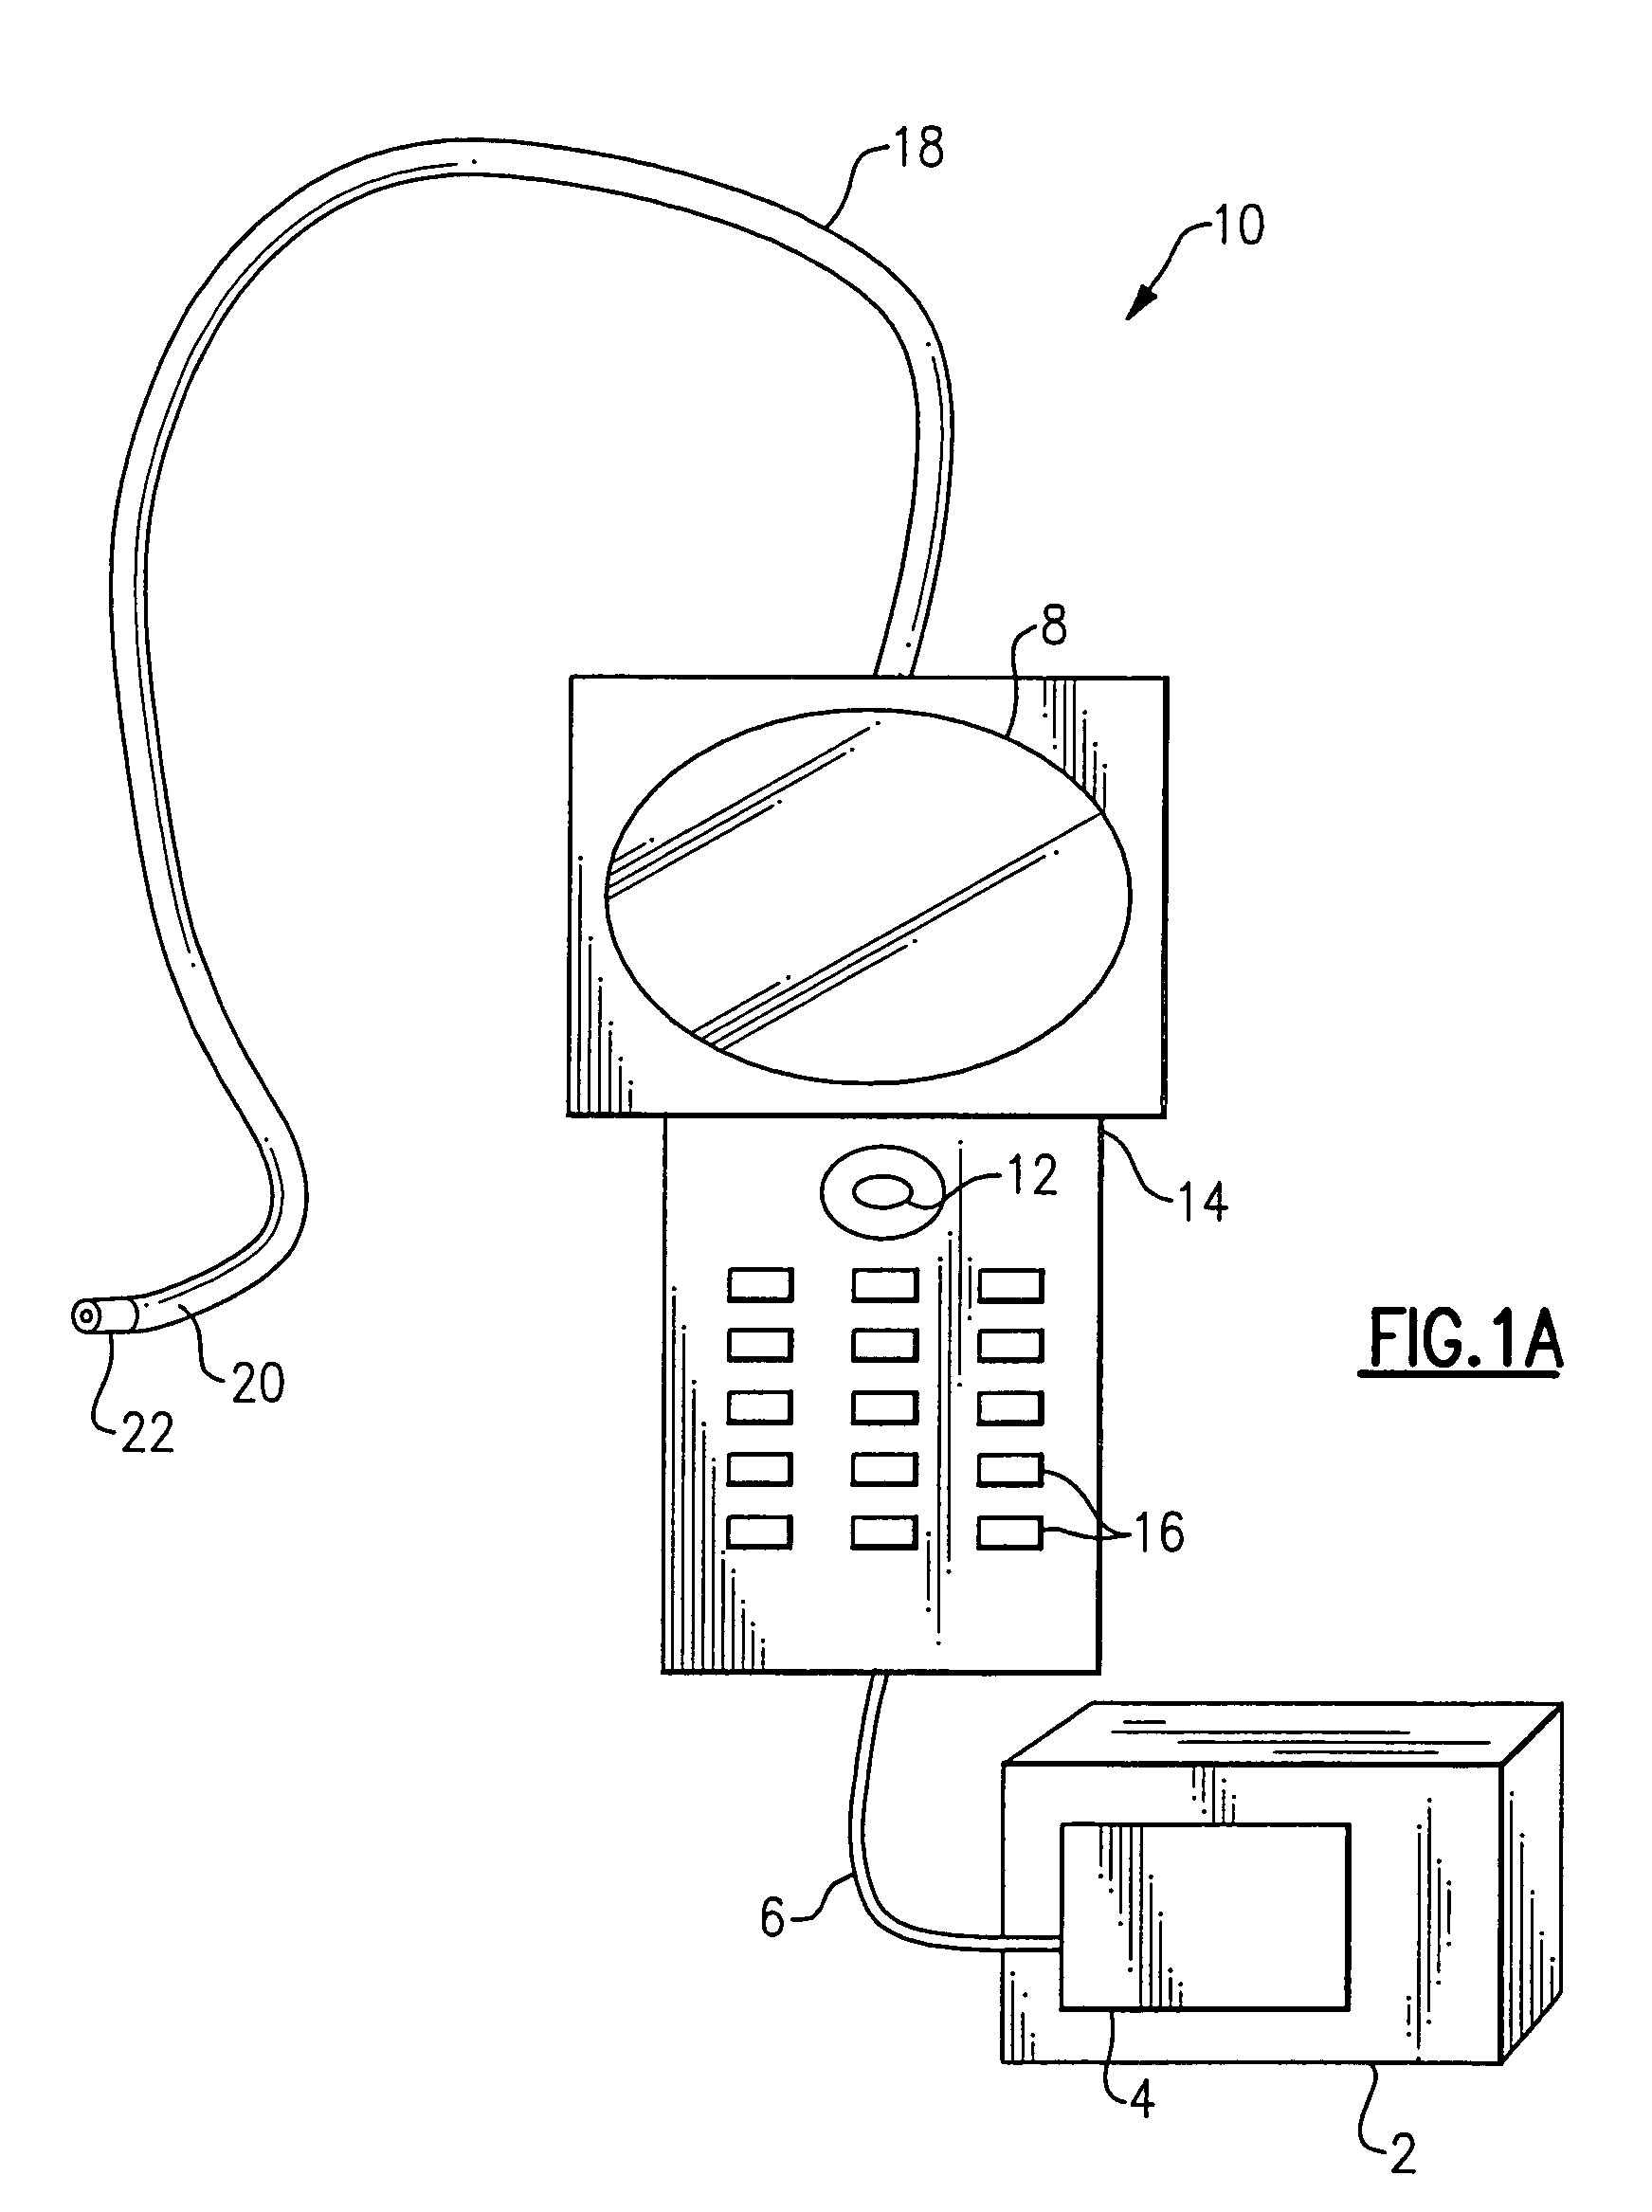 Method and apparatus for improving the operation of a remote viewing device by changing the calibration settings of its articulation servos